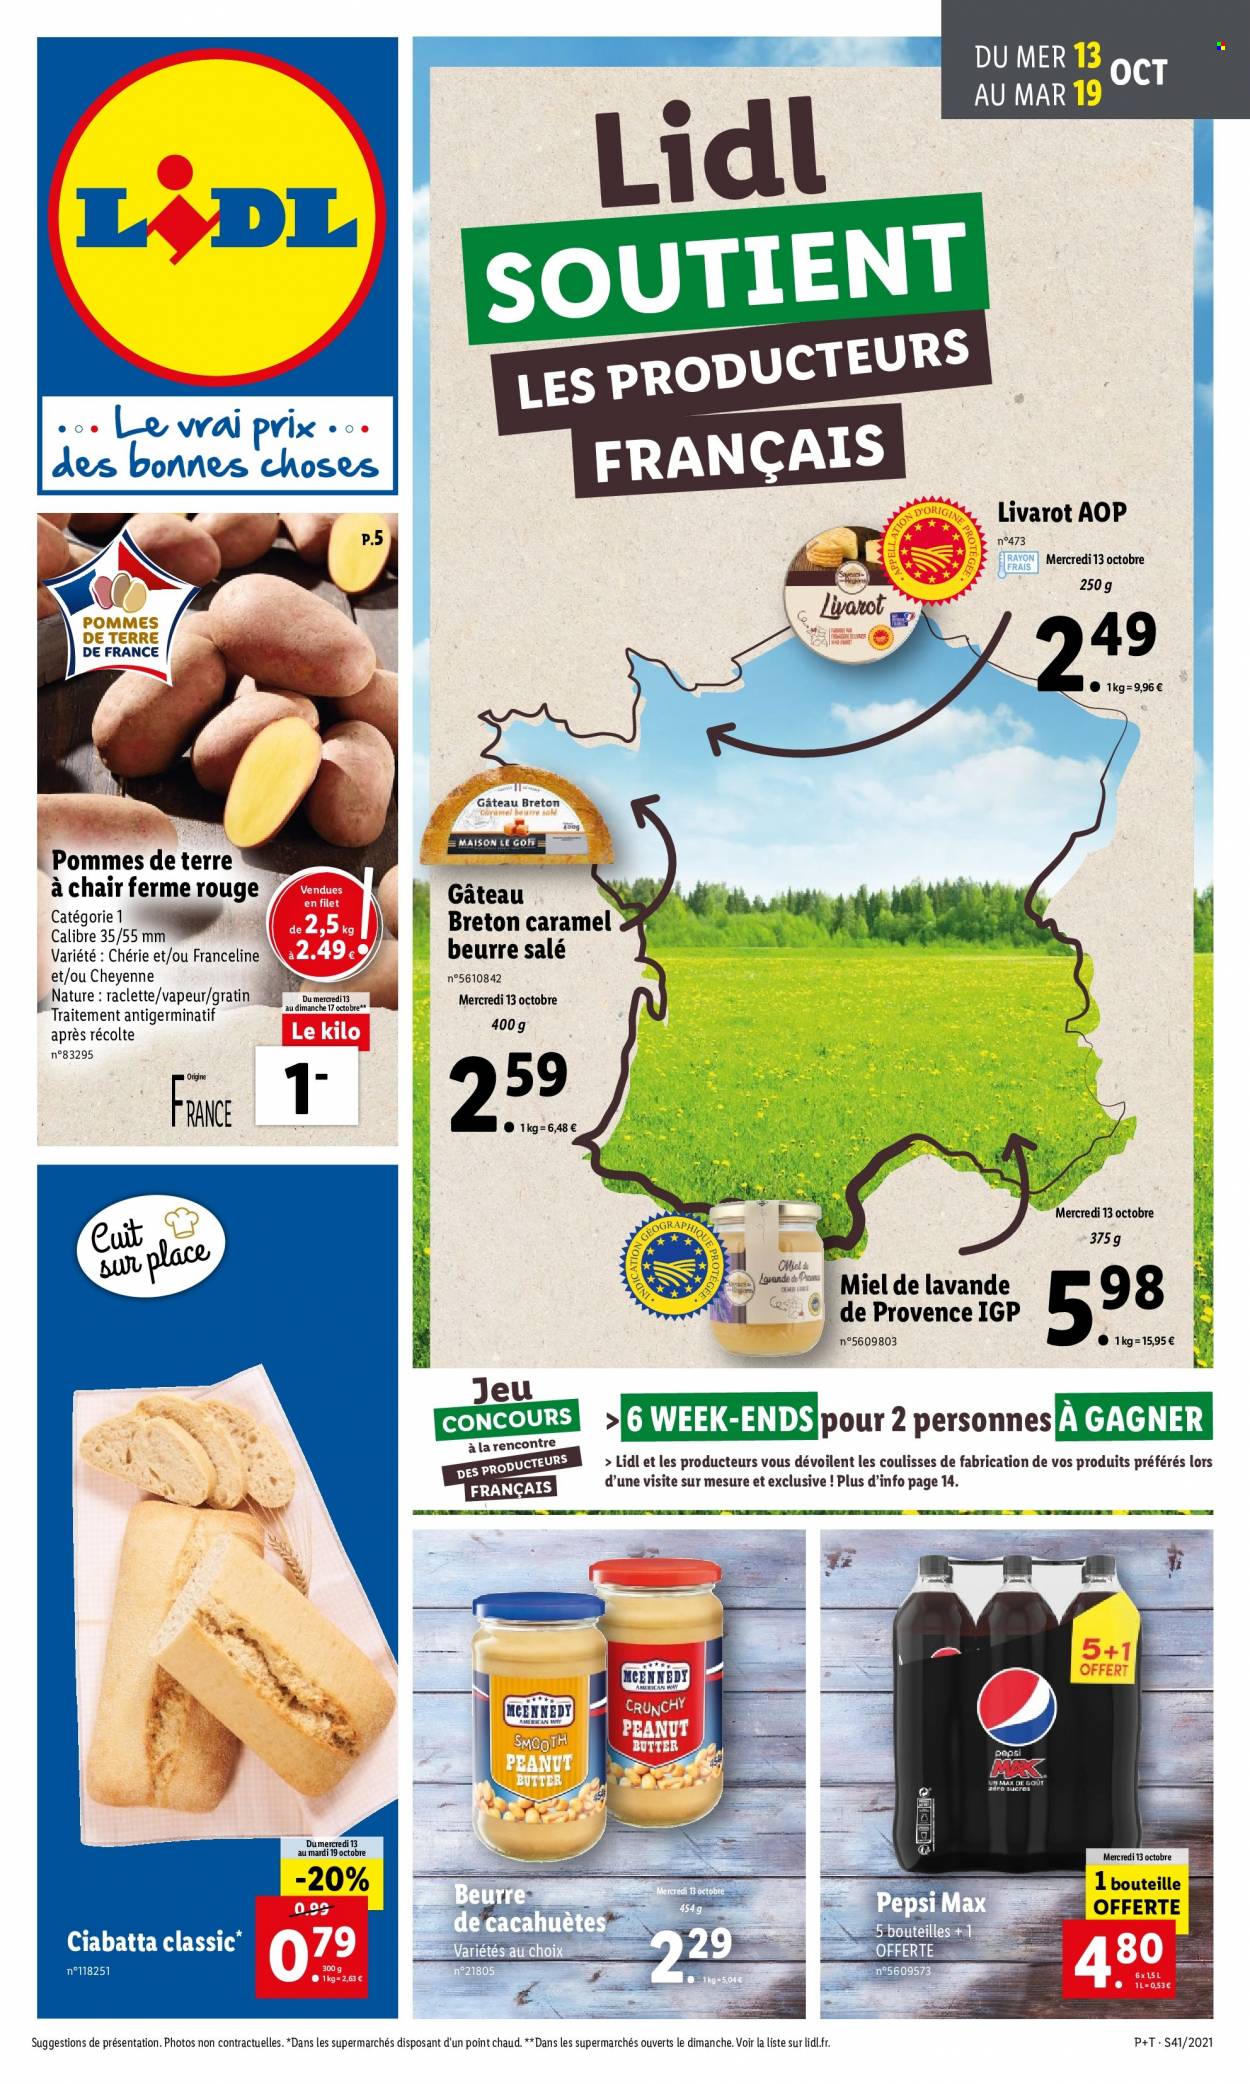 Catalogue Lidl - 13.10.2021 - 19.10.2021. Page 1.